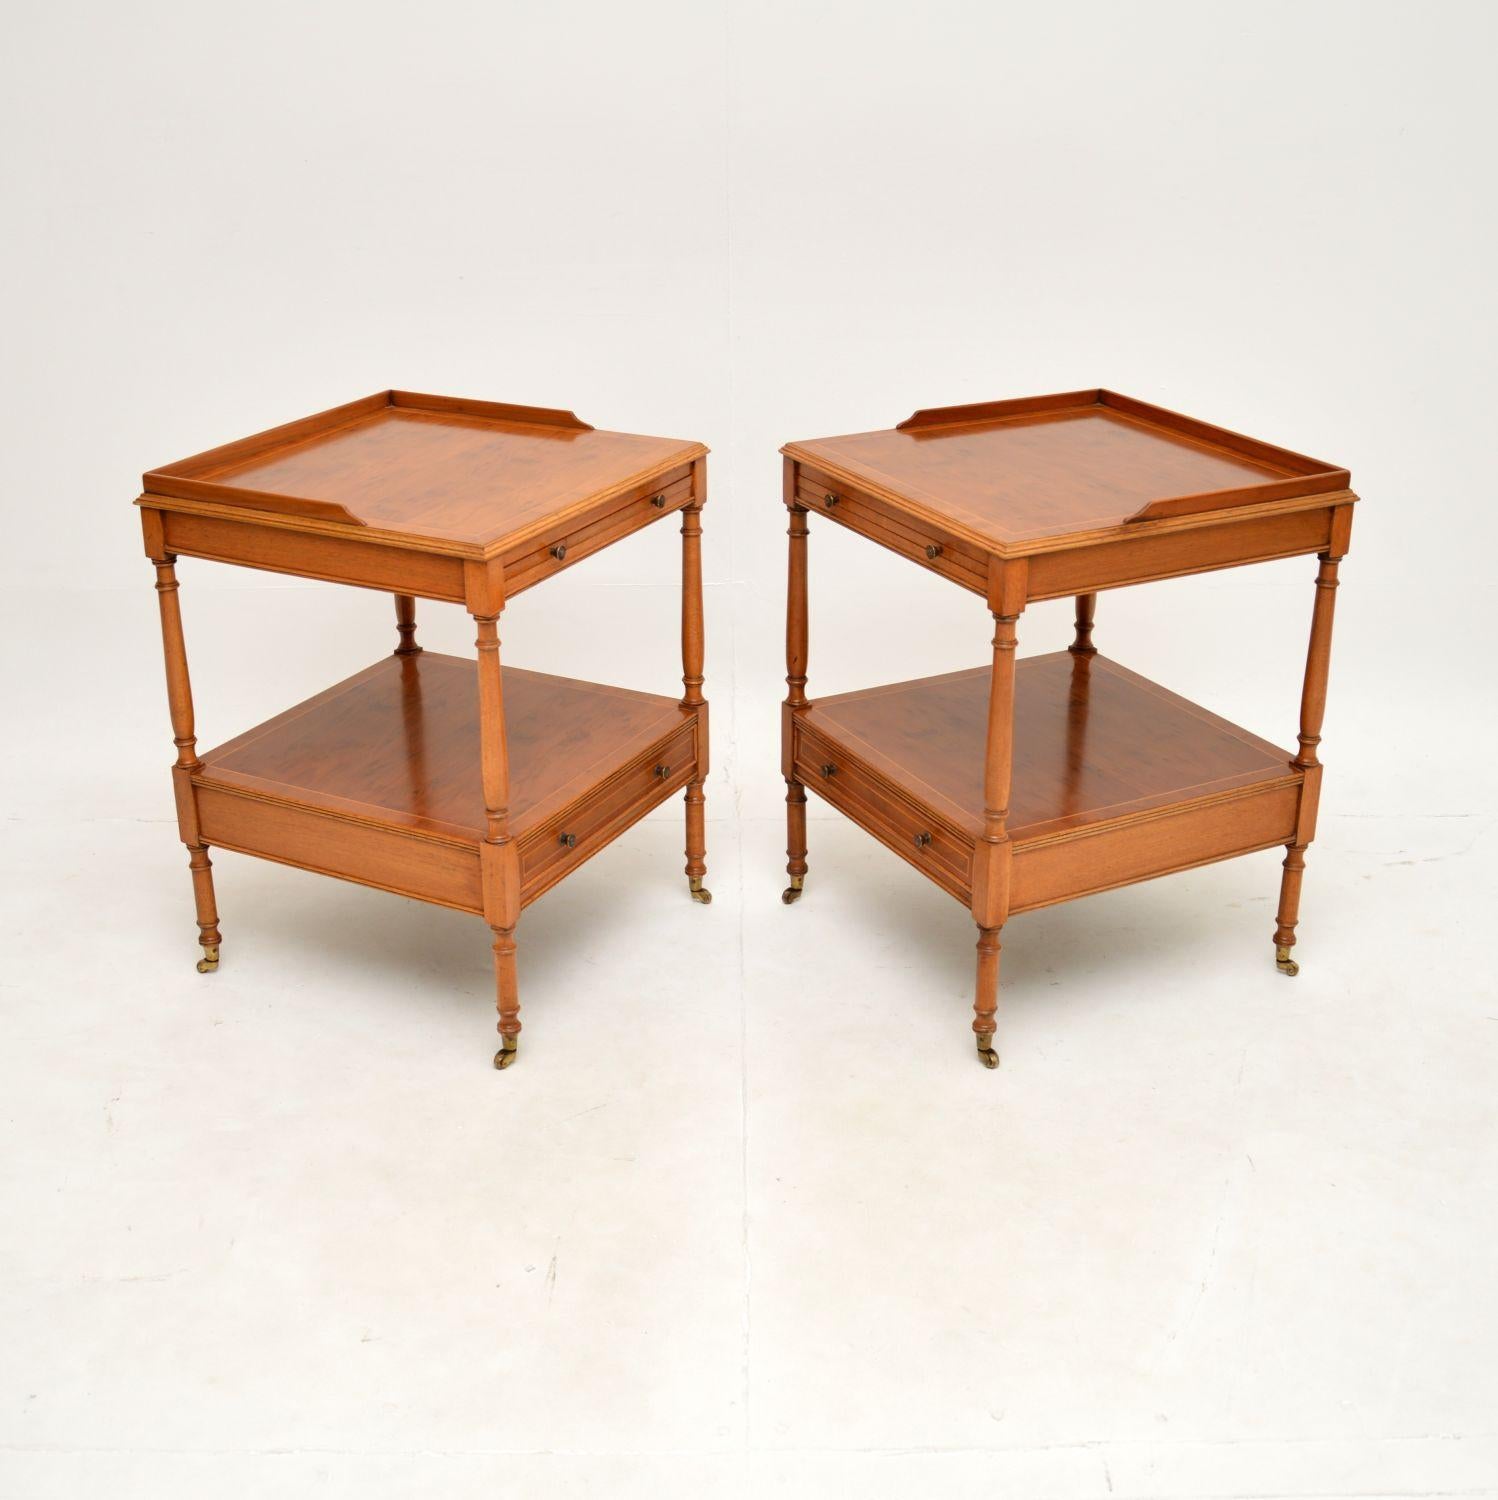 British Pair of Antique Georgian Style Side Tables in Yew Wood